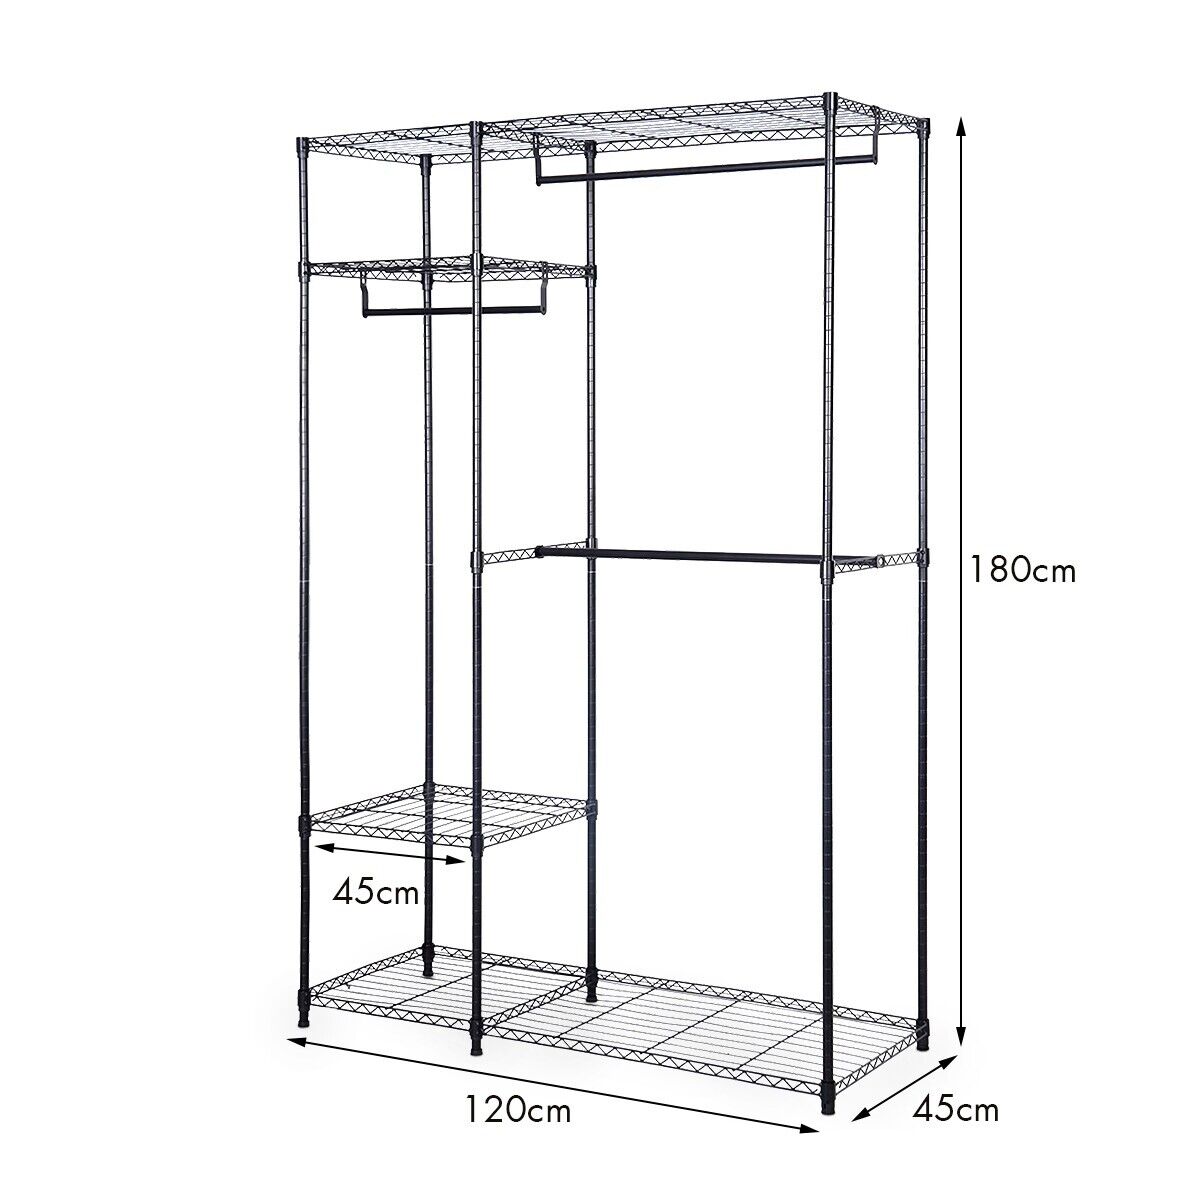 Clothes Rail, Metal Clothes Rack with 3 Hanging Rails and Shelves for Bedroom, Black, Costway, 3